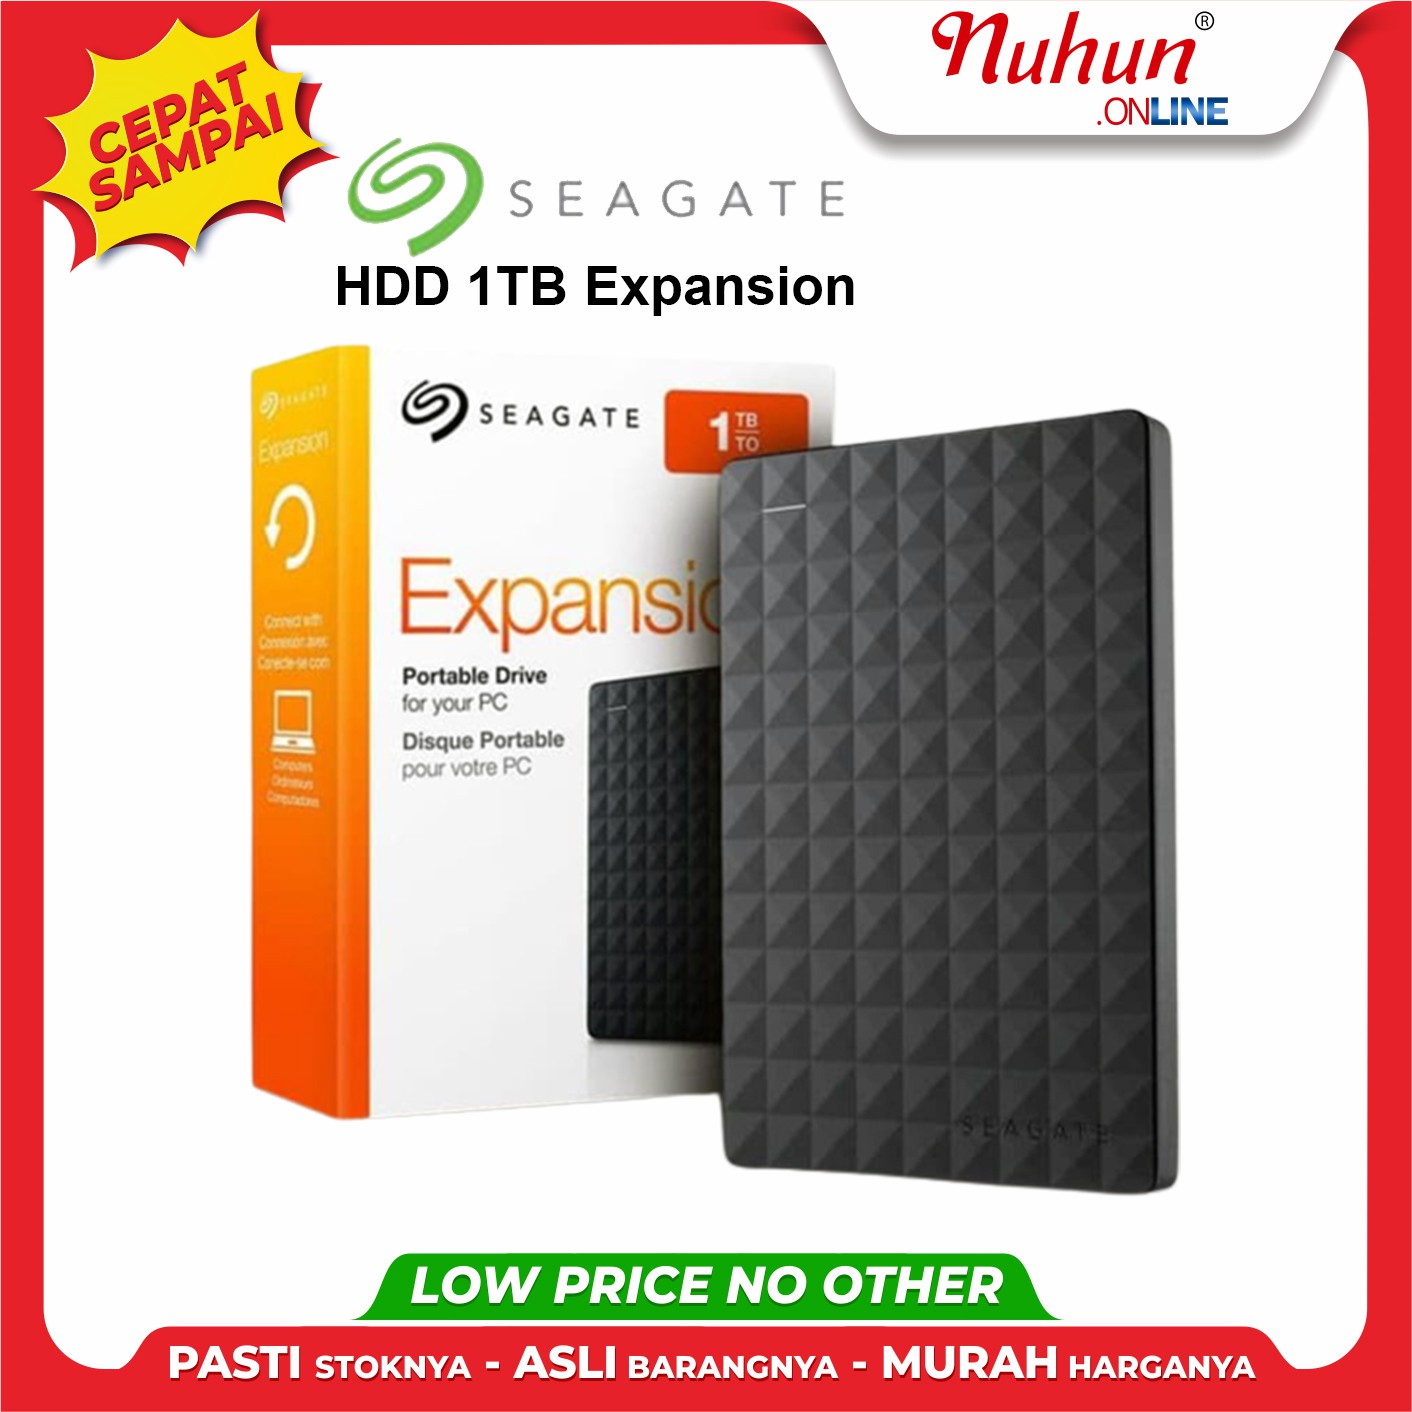 HDD 1TB Expansion